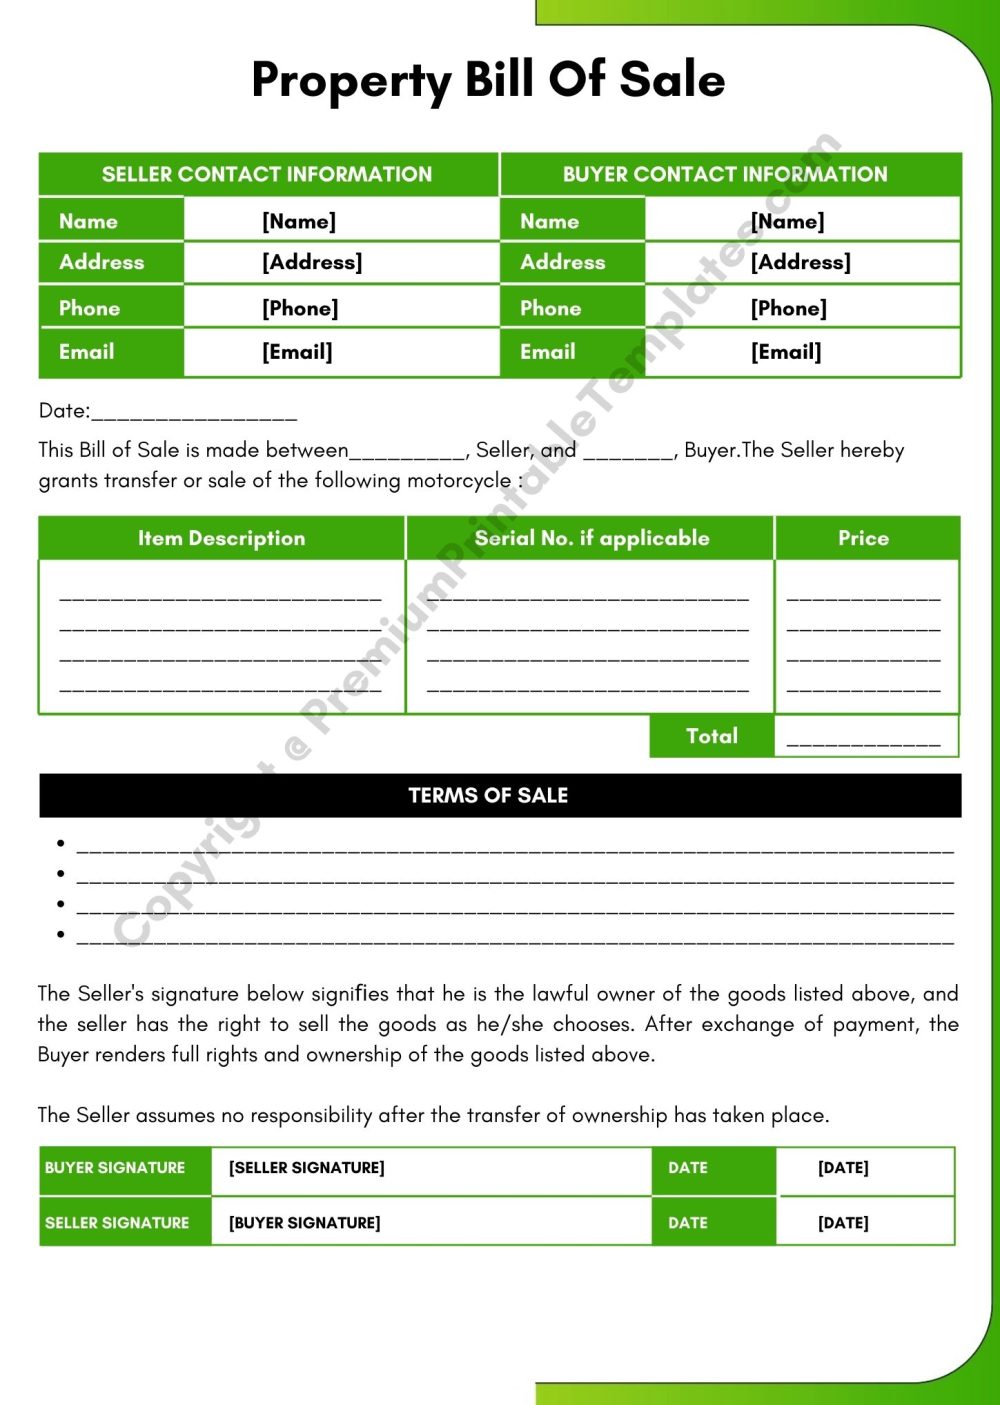 Property Bill Of Sale Template